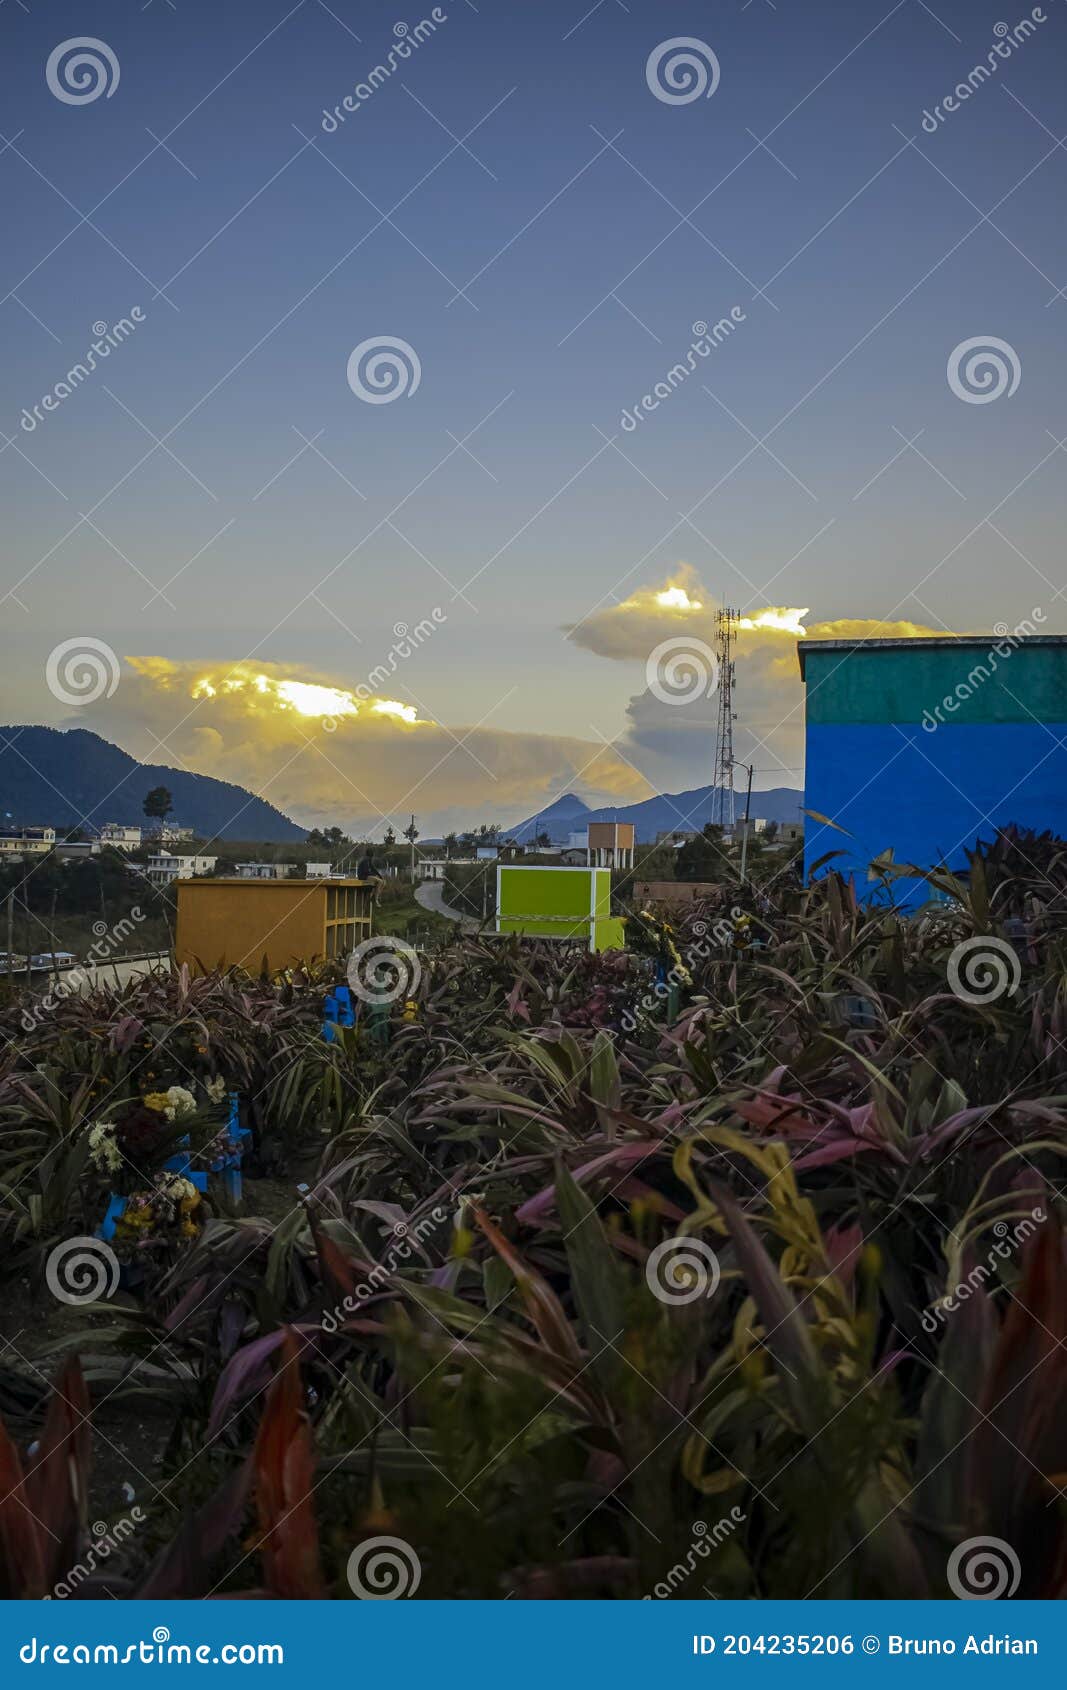 cemetery with flowers and sunset  cajola